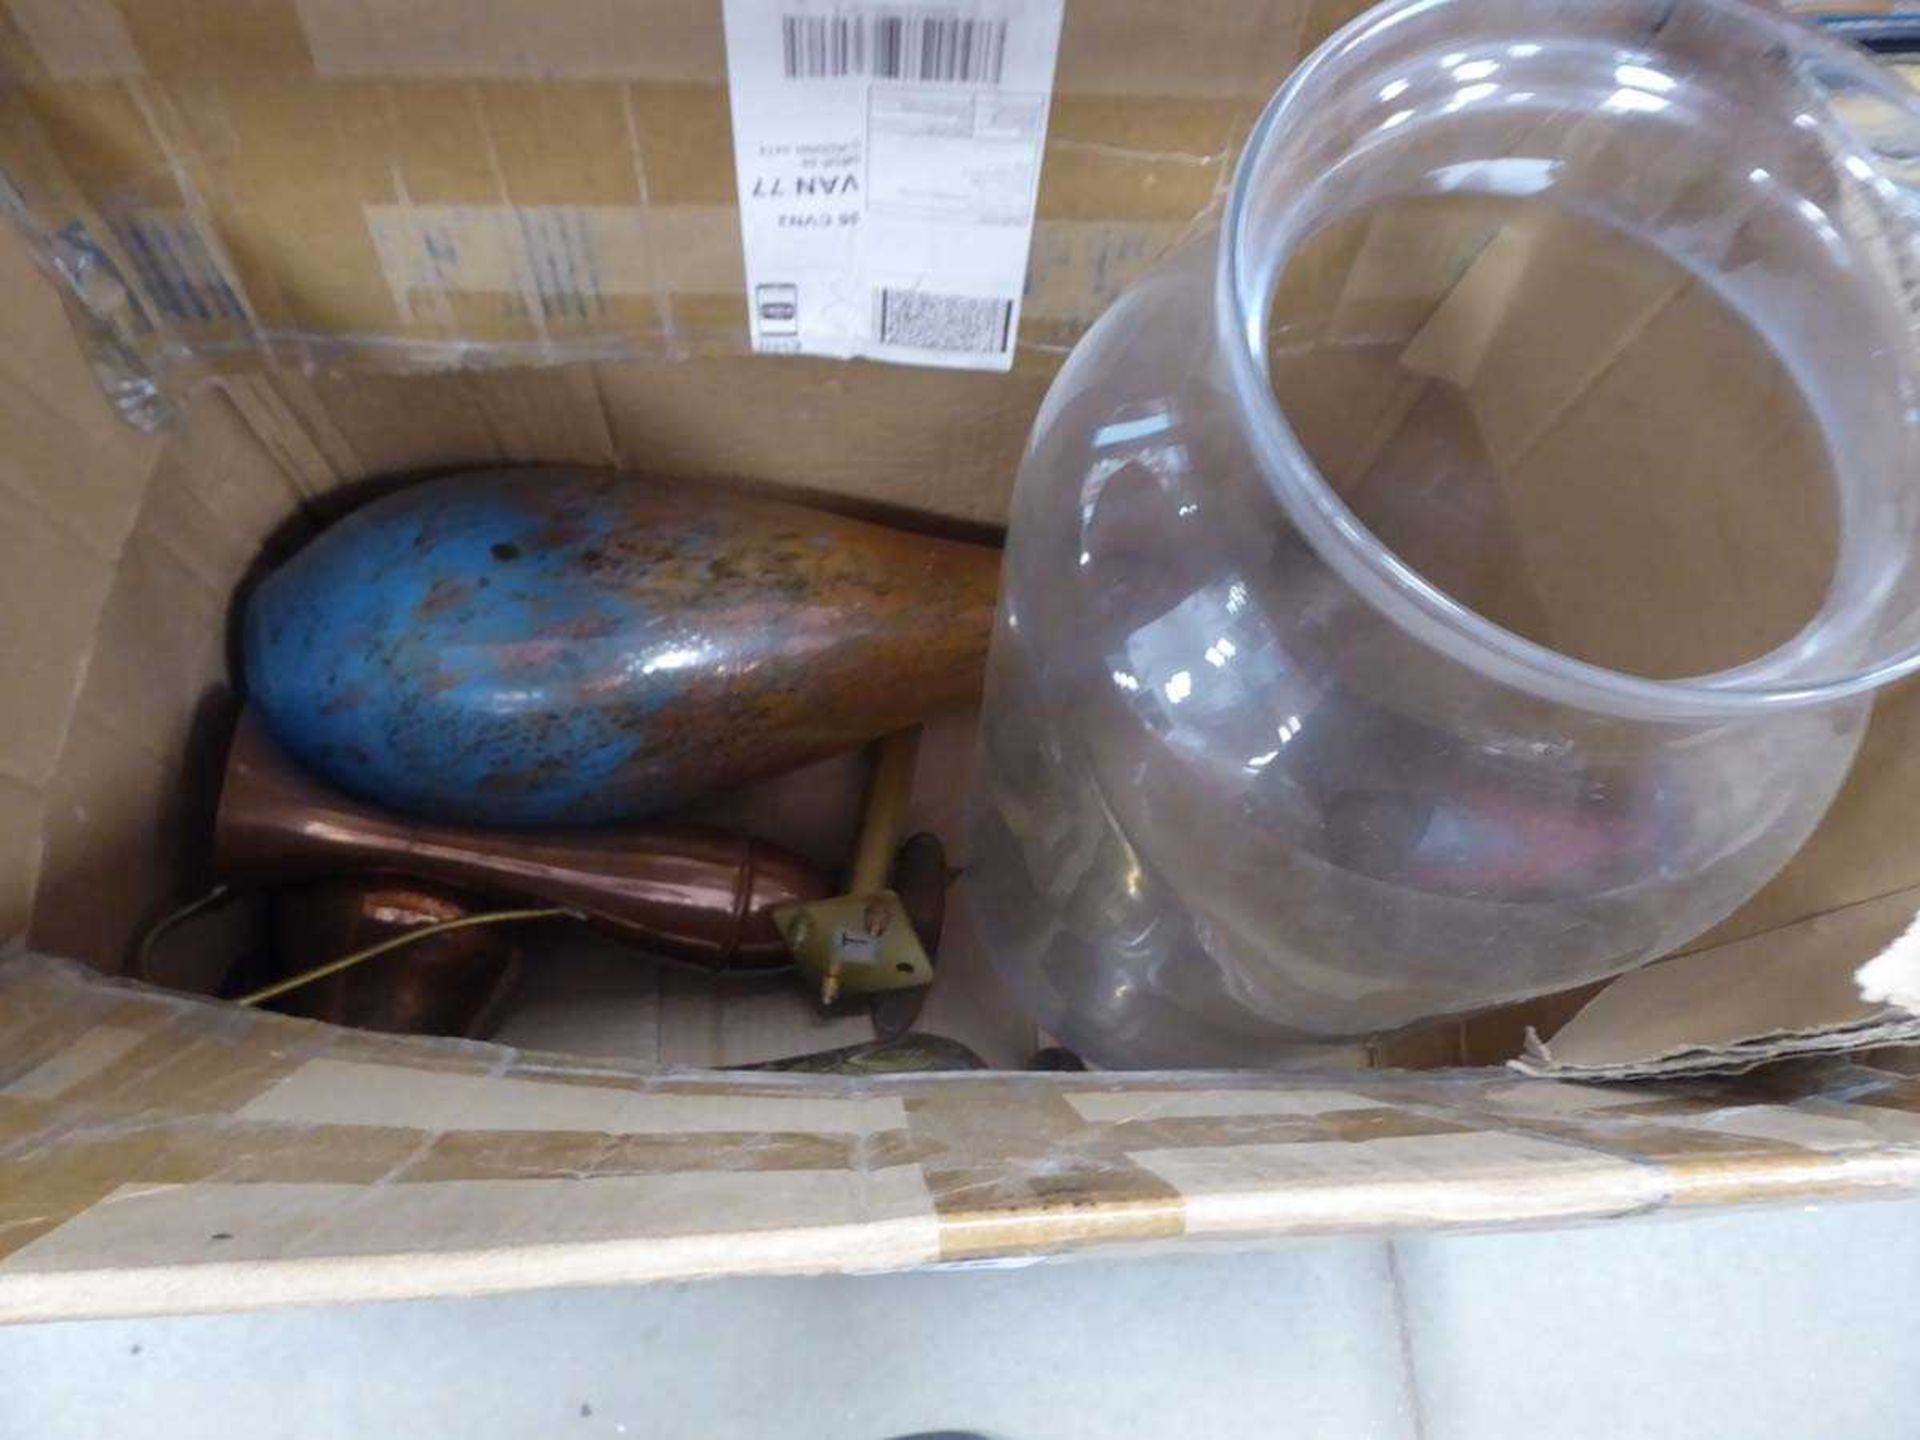 Box containing metalware vases, large glass vase and glass blue and brown vase